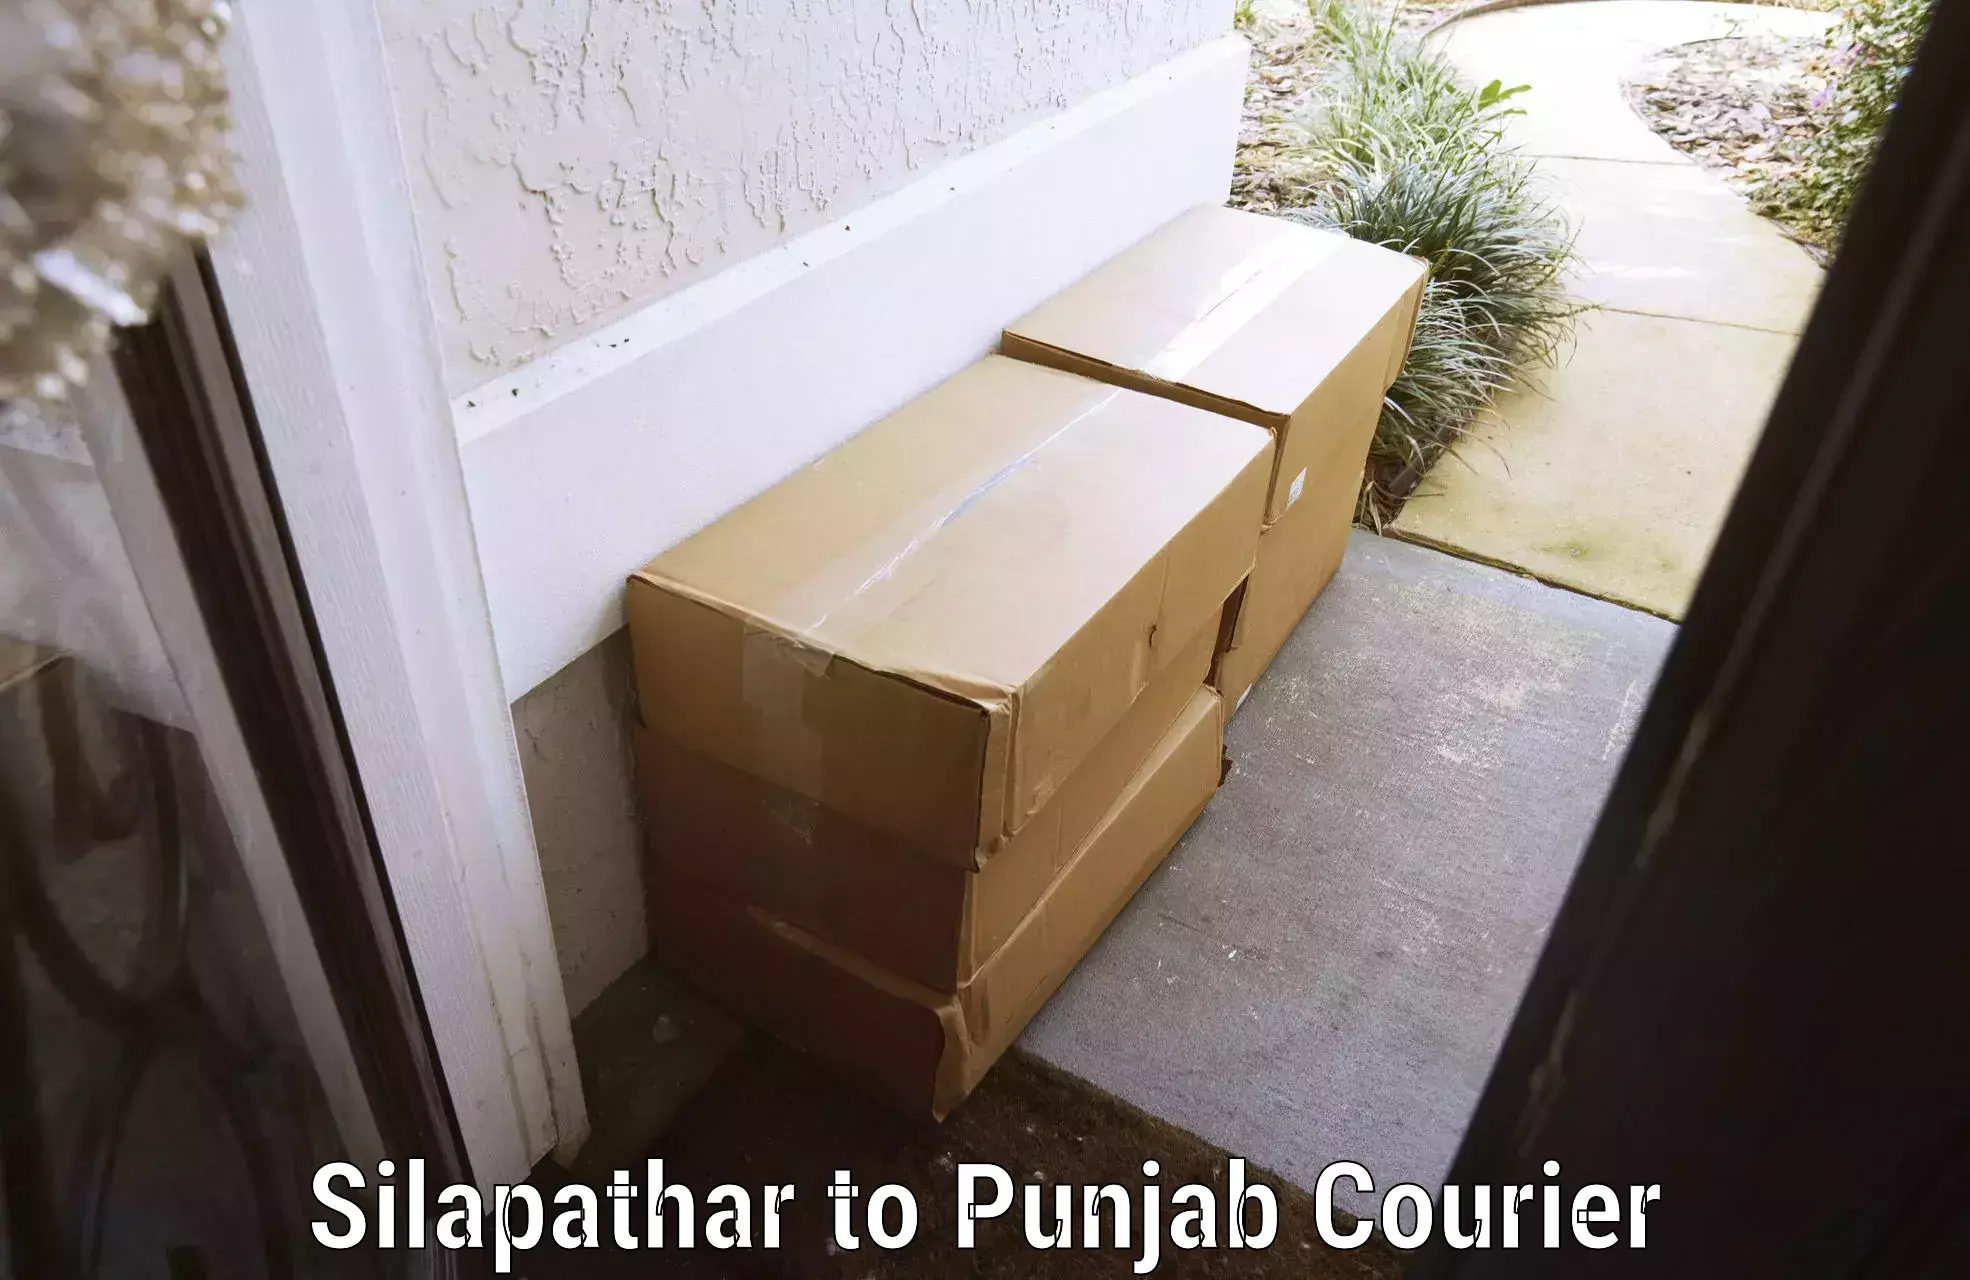 Luggage shipment specialists Silapathar to Begowal